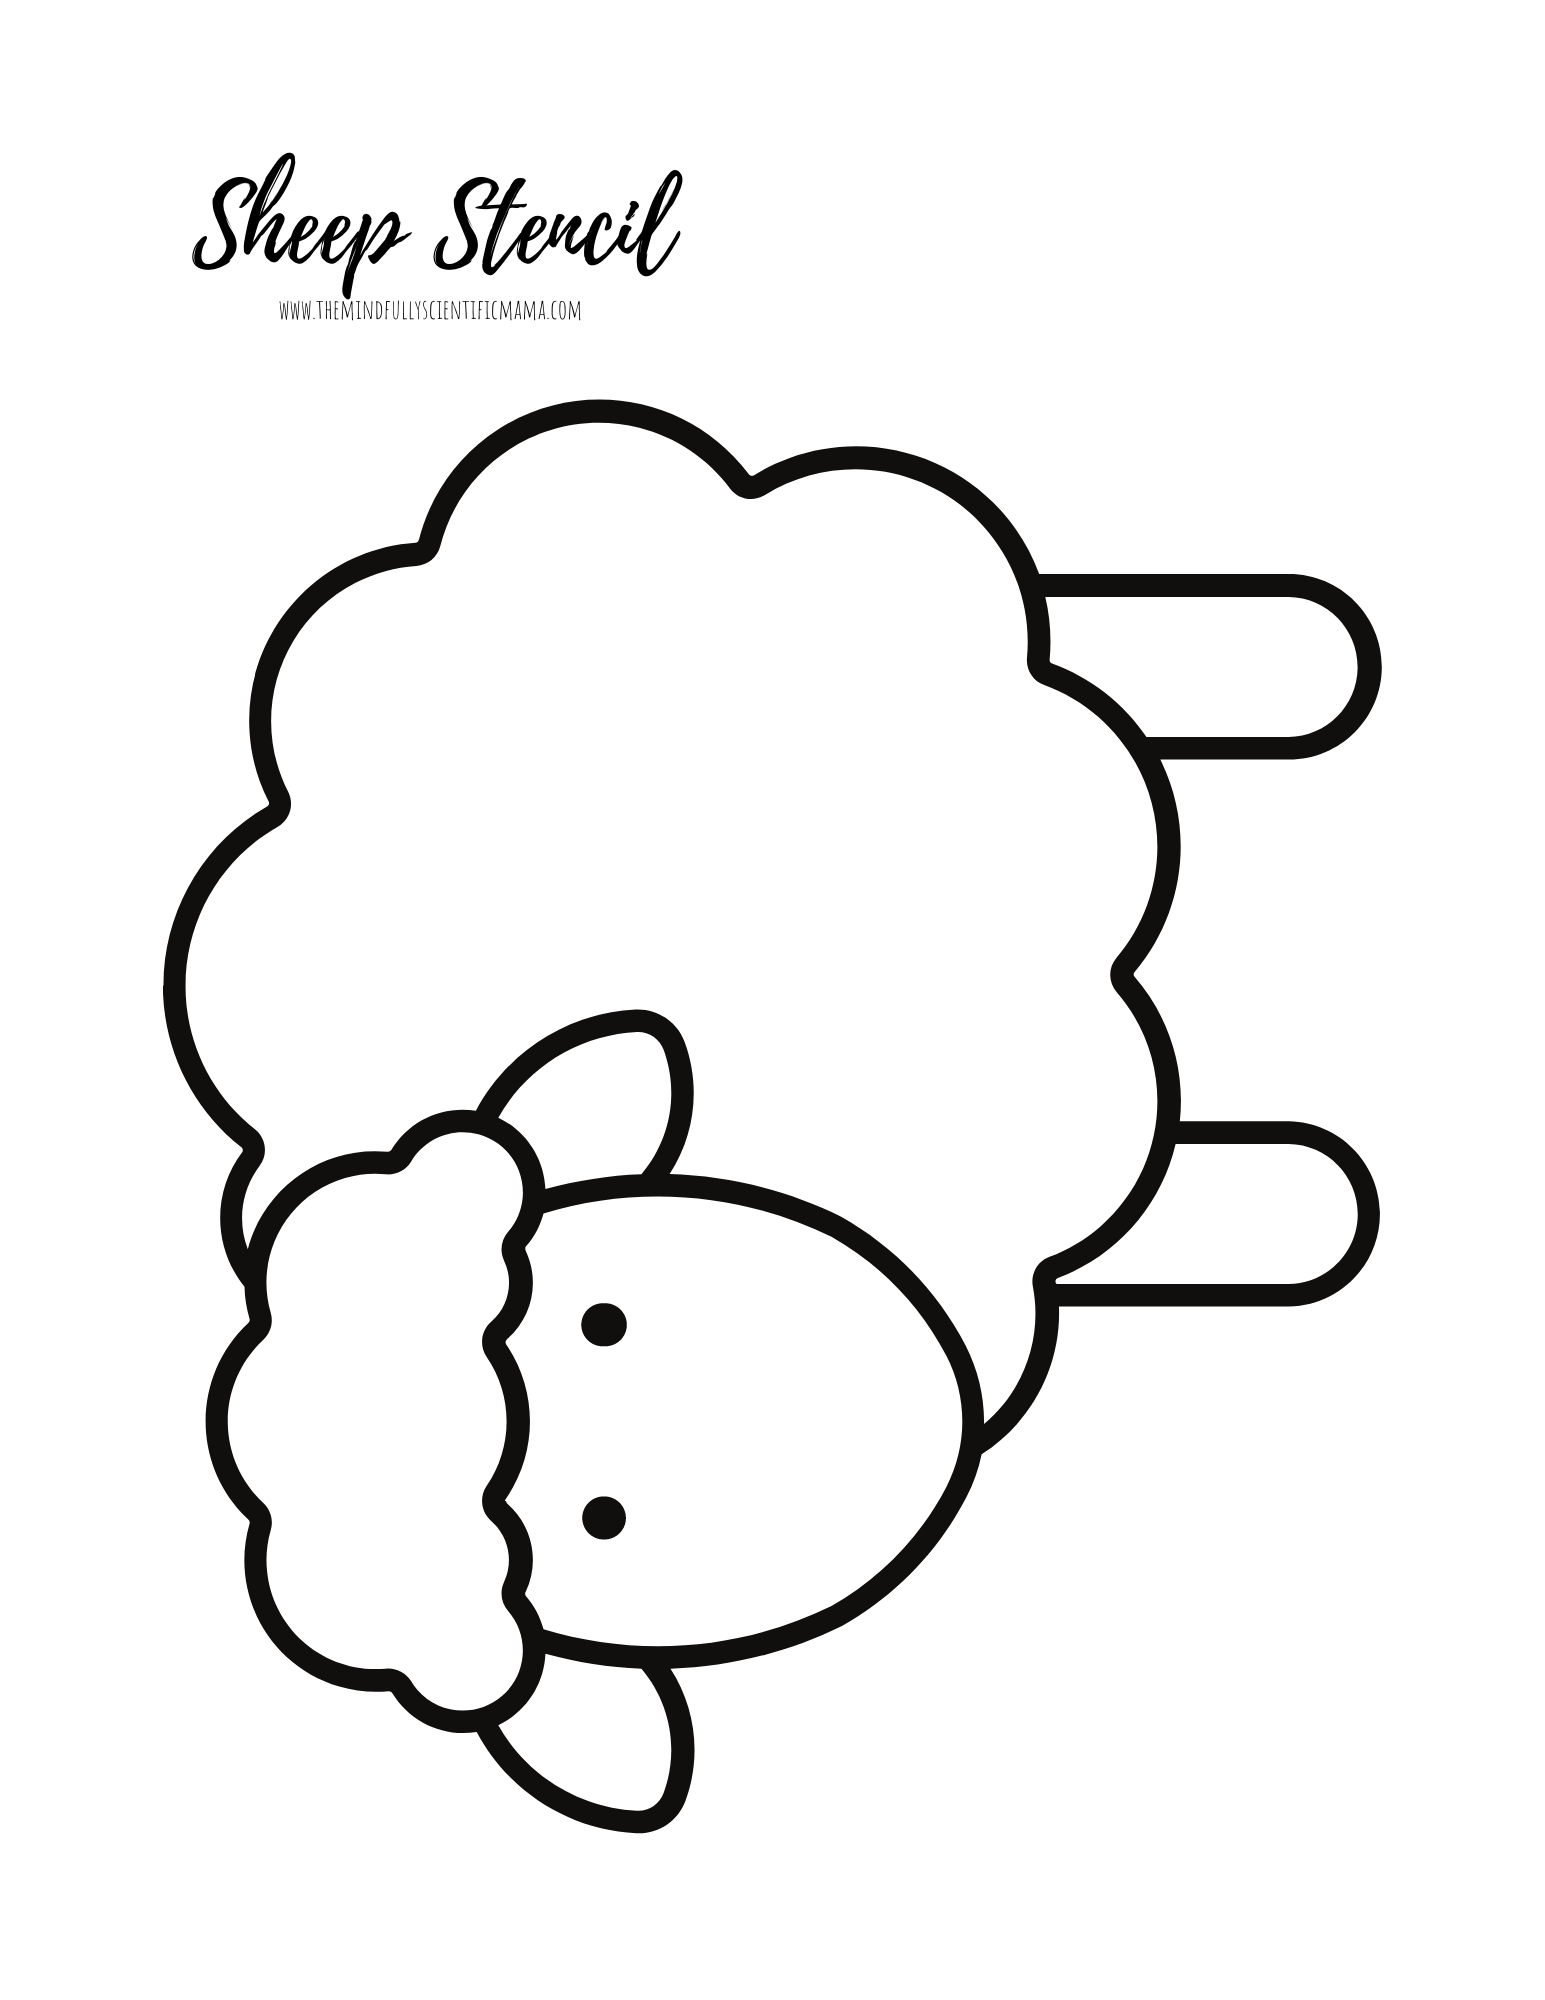 Easy cotton ball sheep crafts